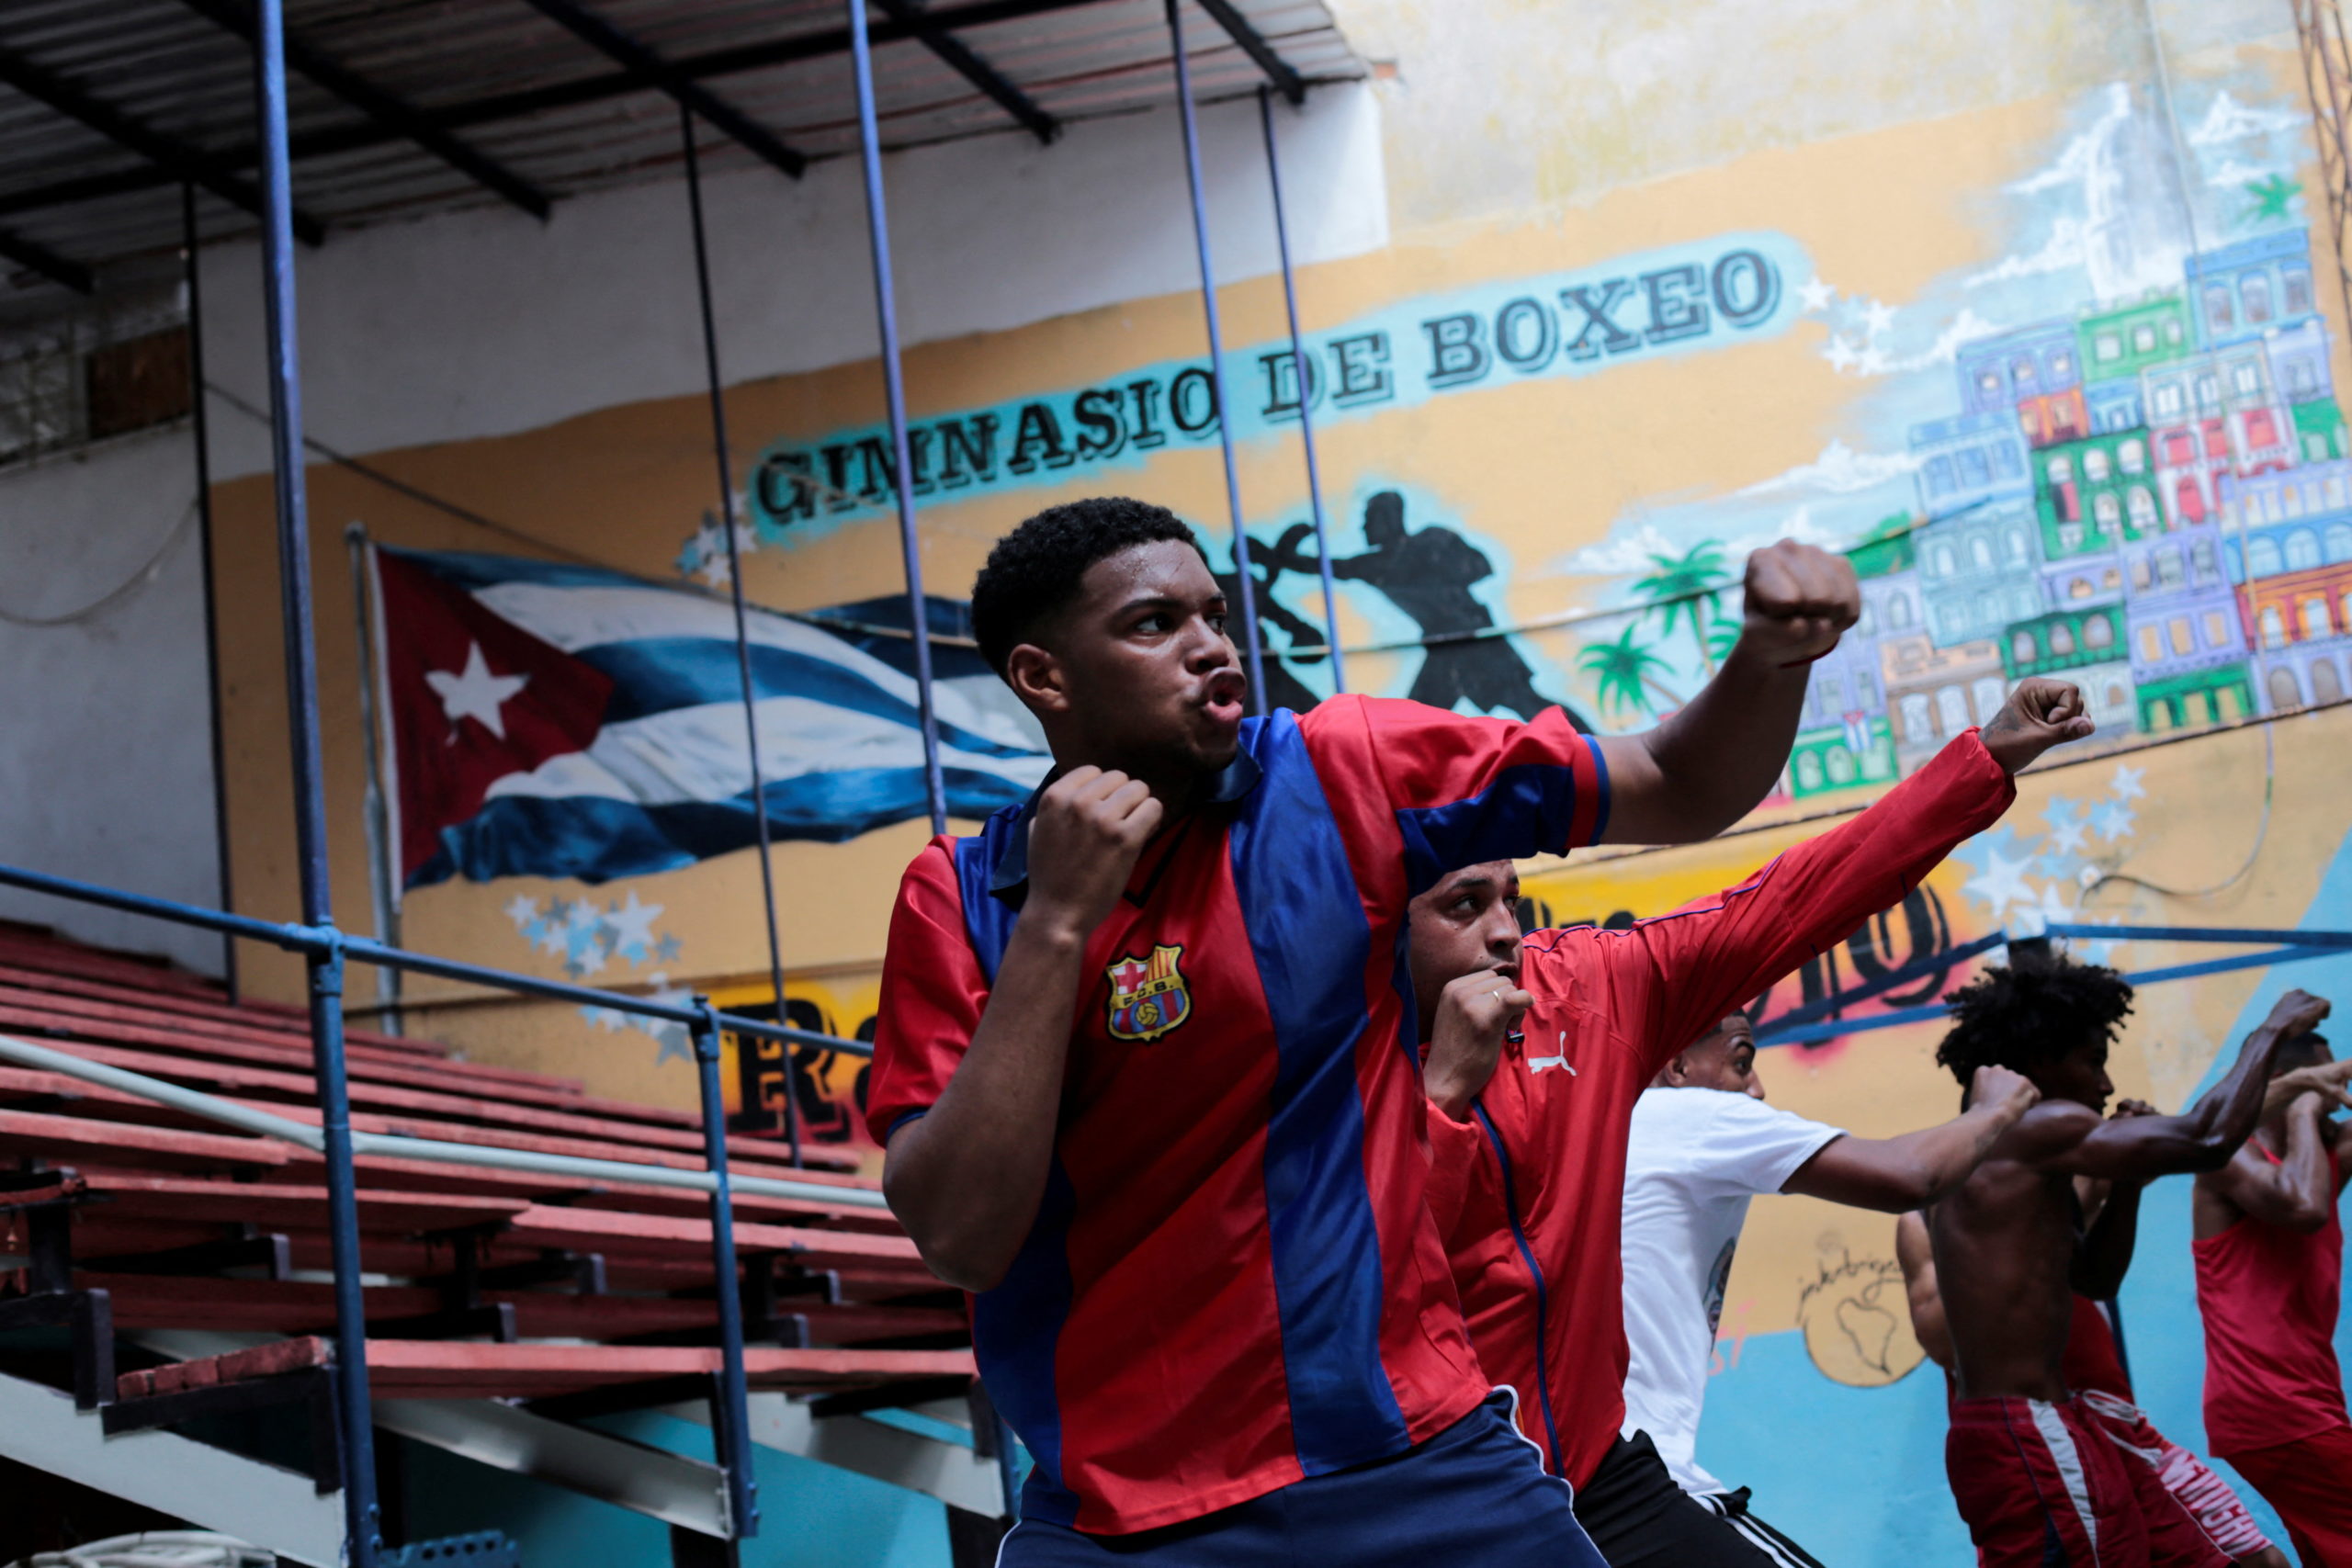 Boxing students practice during a training session in downtown Havana, Cuba, April 5, 2022. 